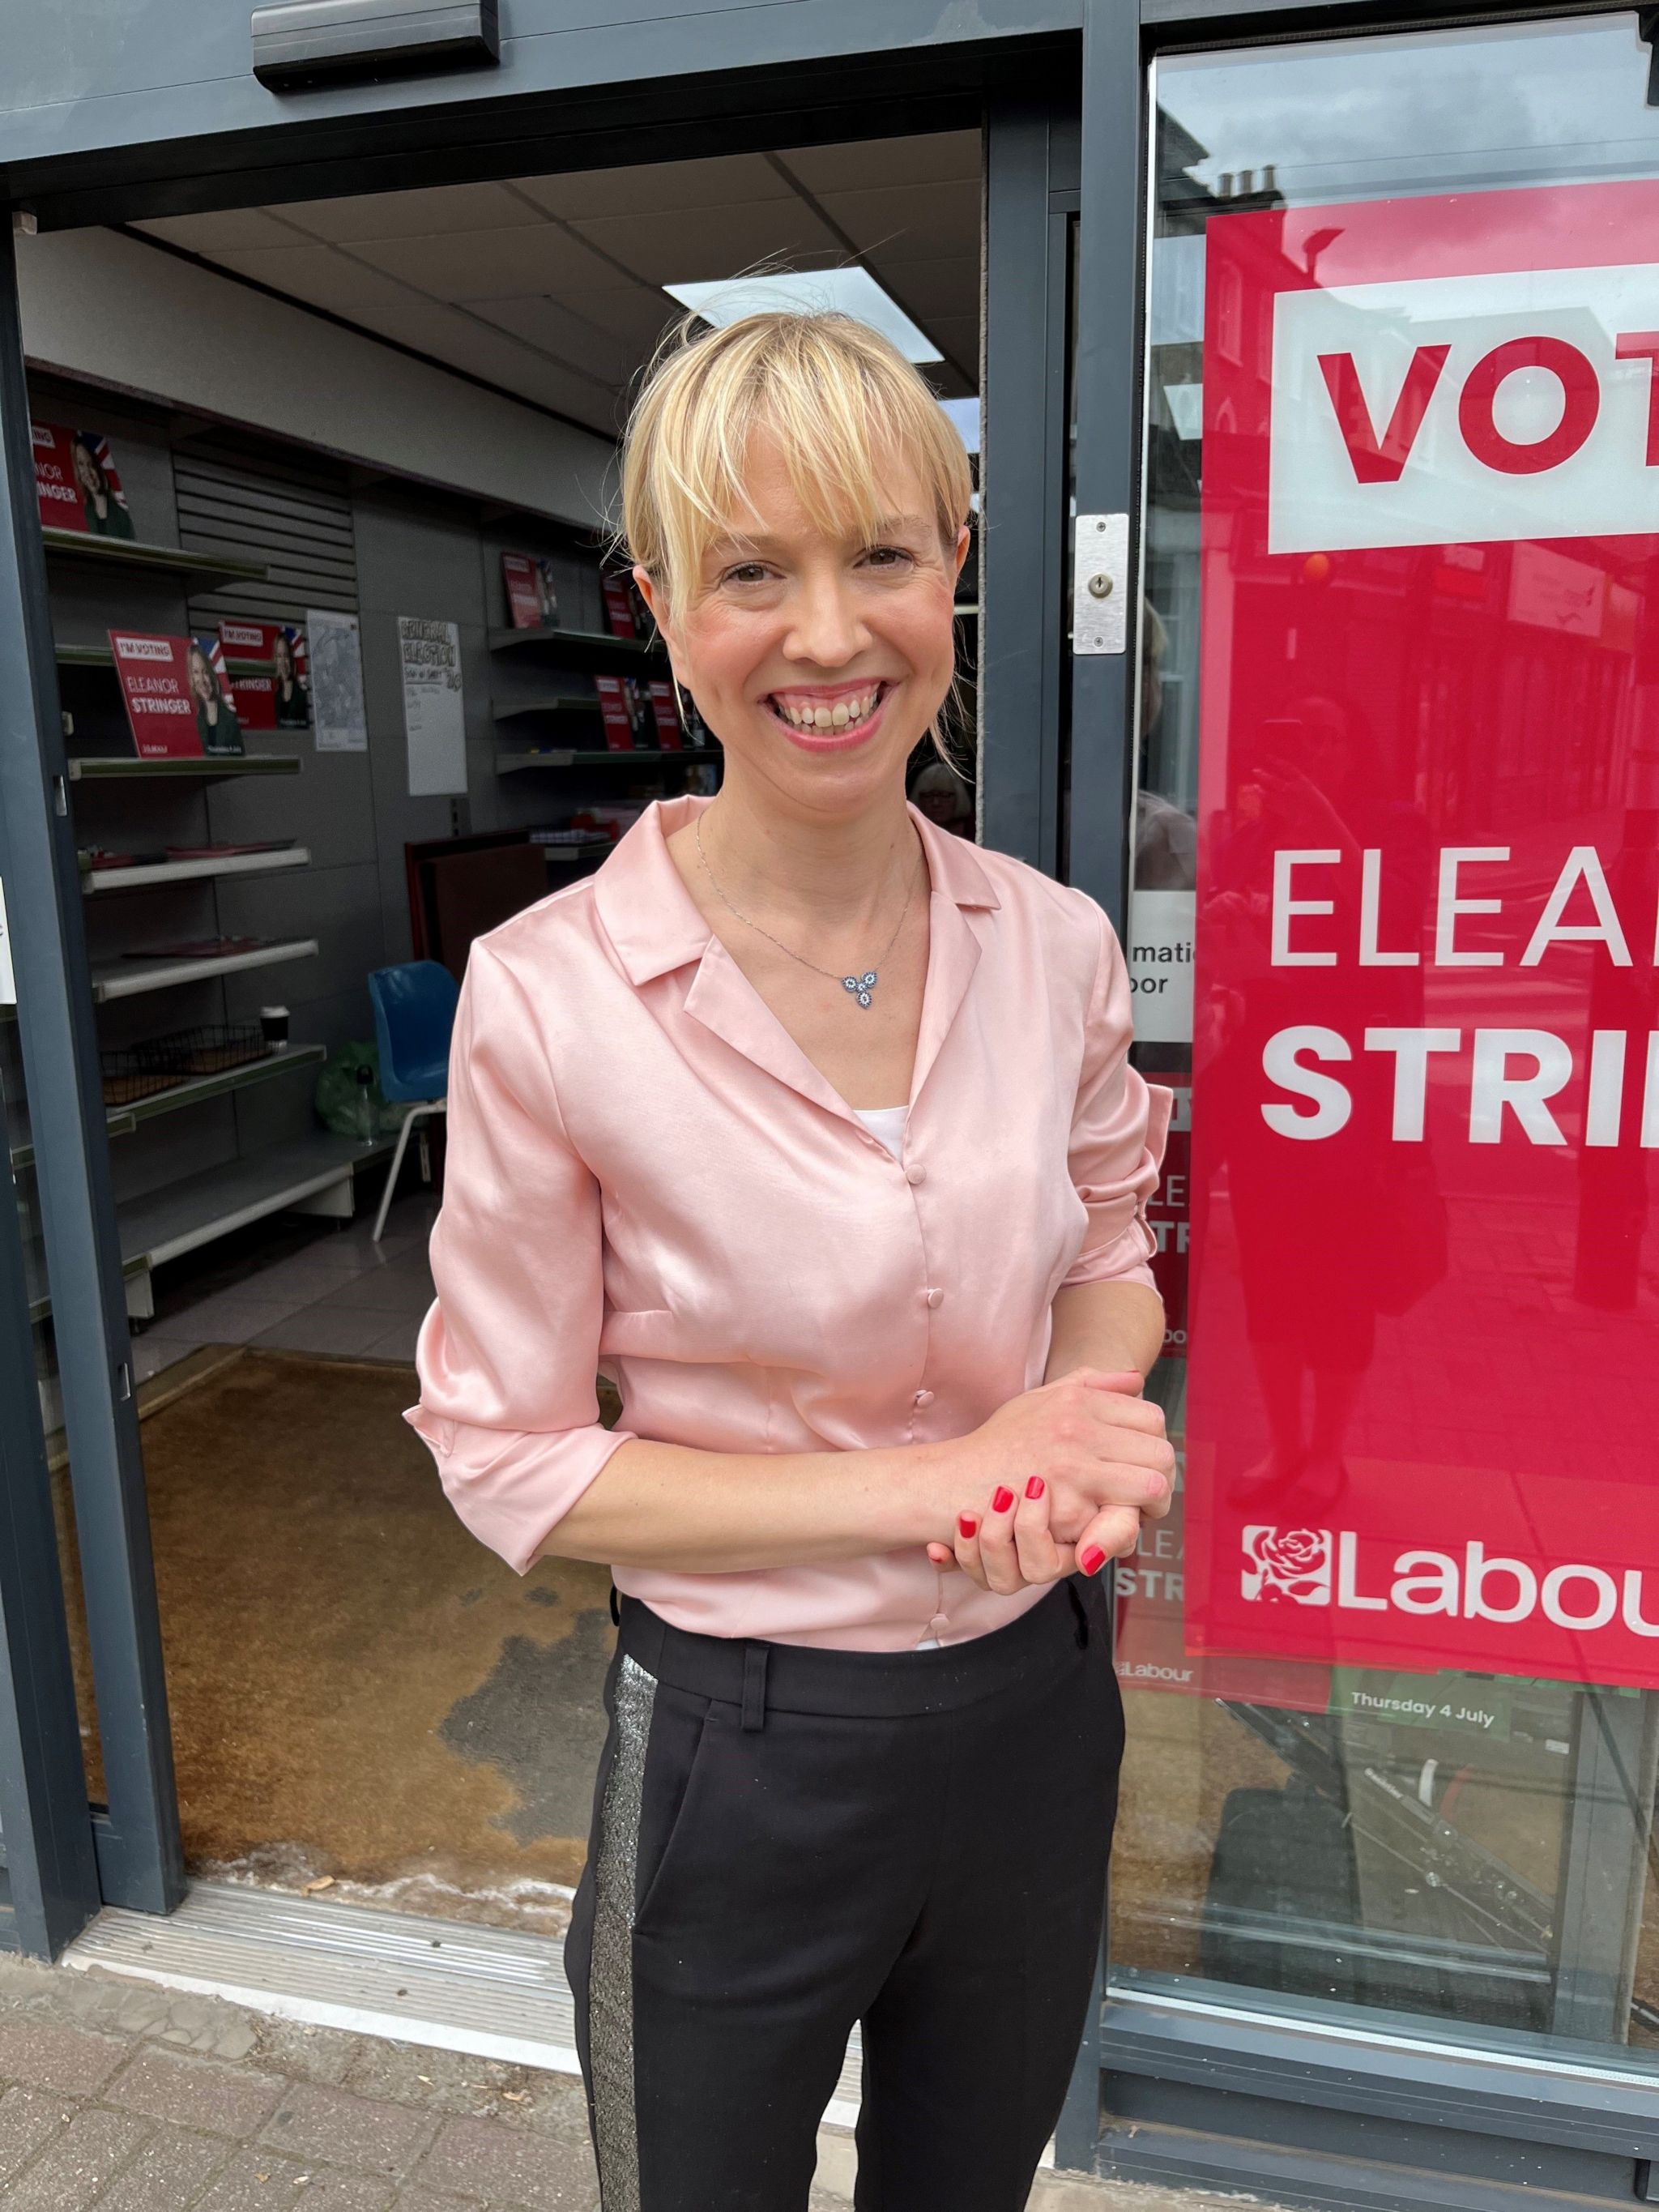 Eleanor Stringer is standing for the Labour Party